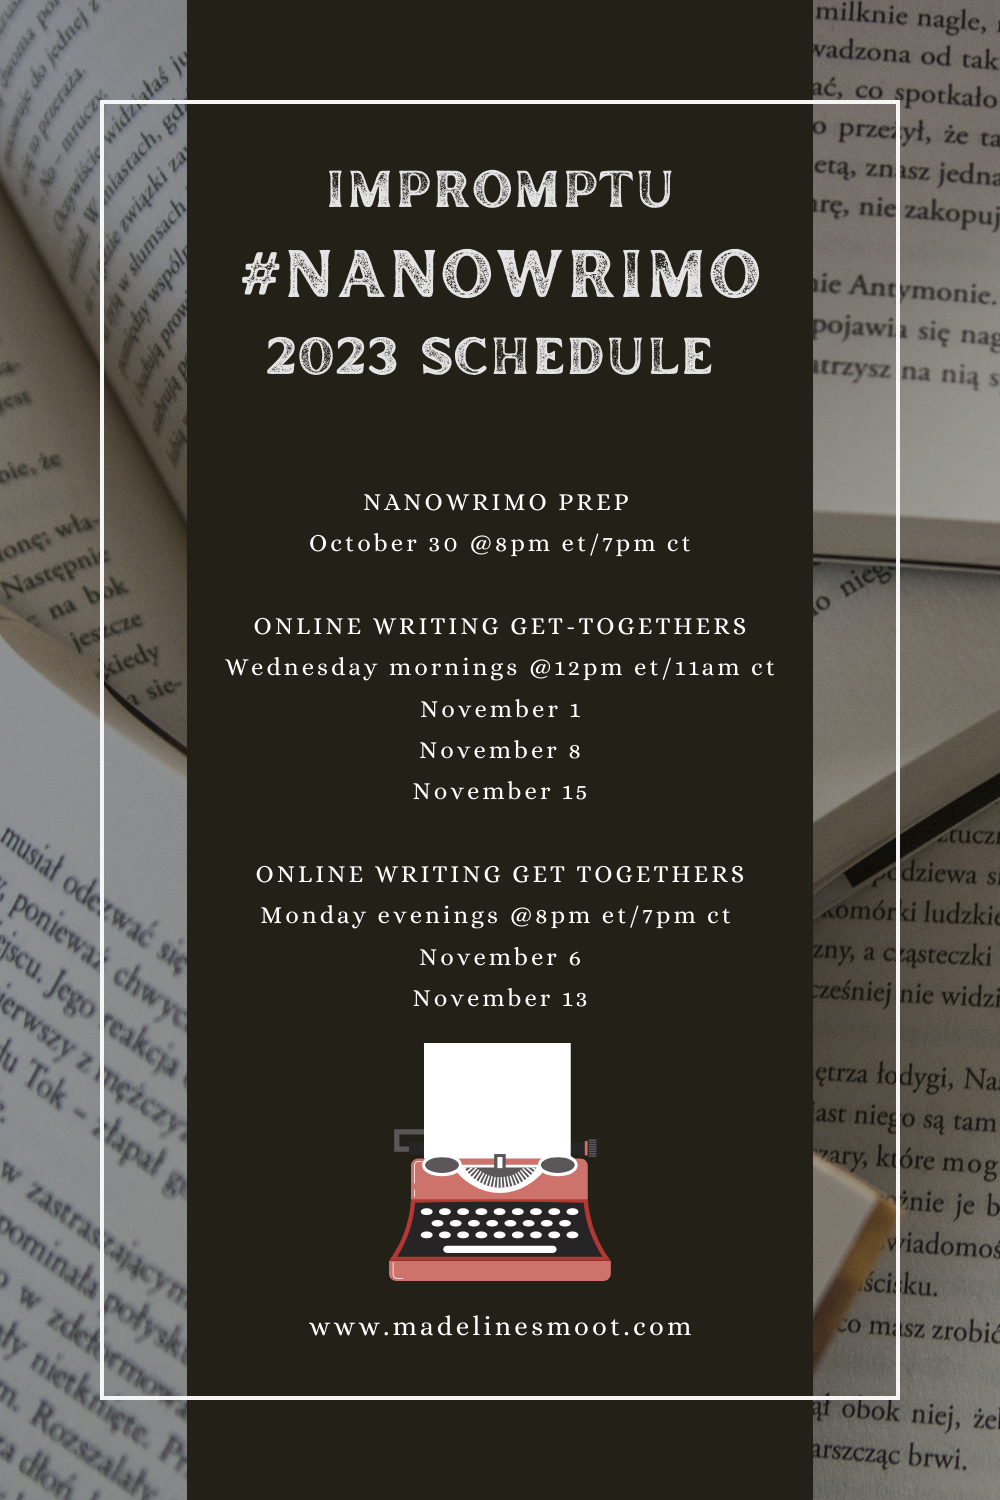 background of books with black bar with the following information: Impromptu #NANOWRIMO 2023 Schedule
NANOWRIMO PREP 
October 30 @8pm et/7pm ct

ONLINE WRITING GET-TOGETHERS
Wednesday mornings @12pm et/11am ct
November 1
November 8
November 15

ONLINE WRITING GET TOGETHERS
Monday evenings @8pm et/7pm ct 
November 6
November 13
madelinesmoot.com